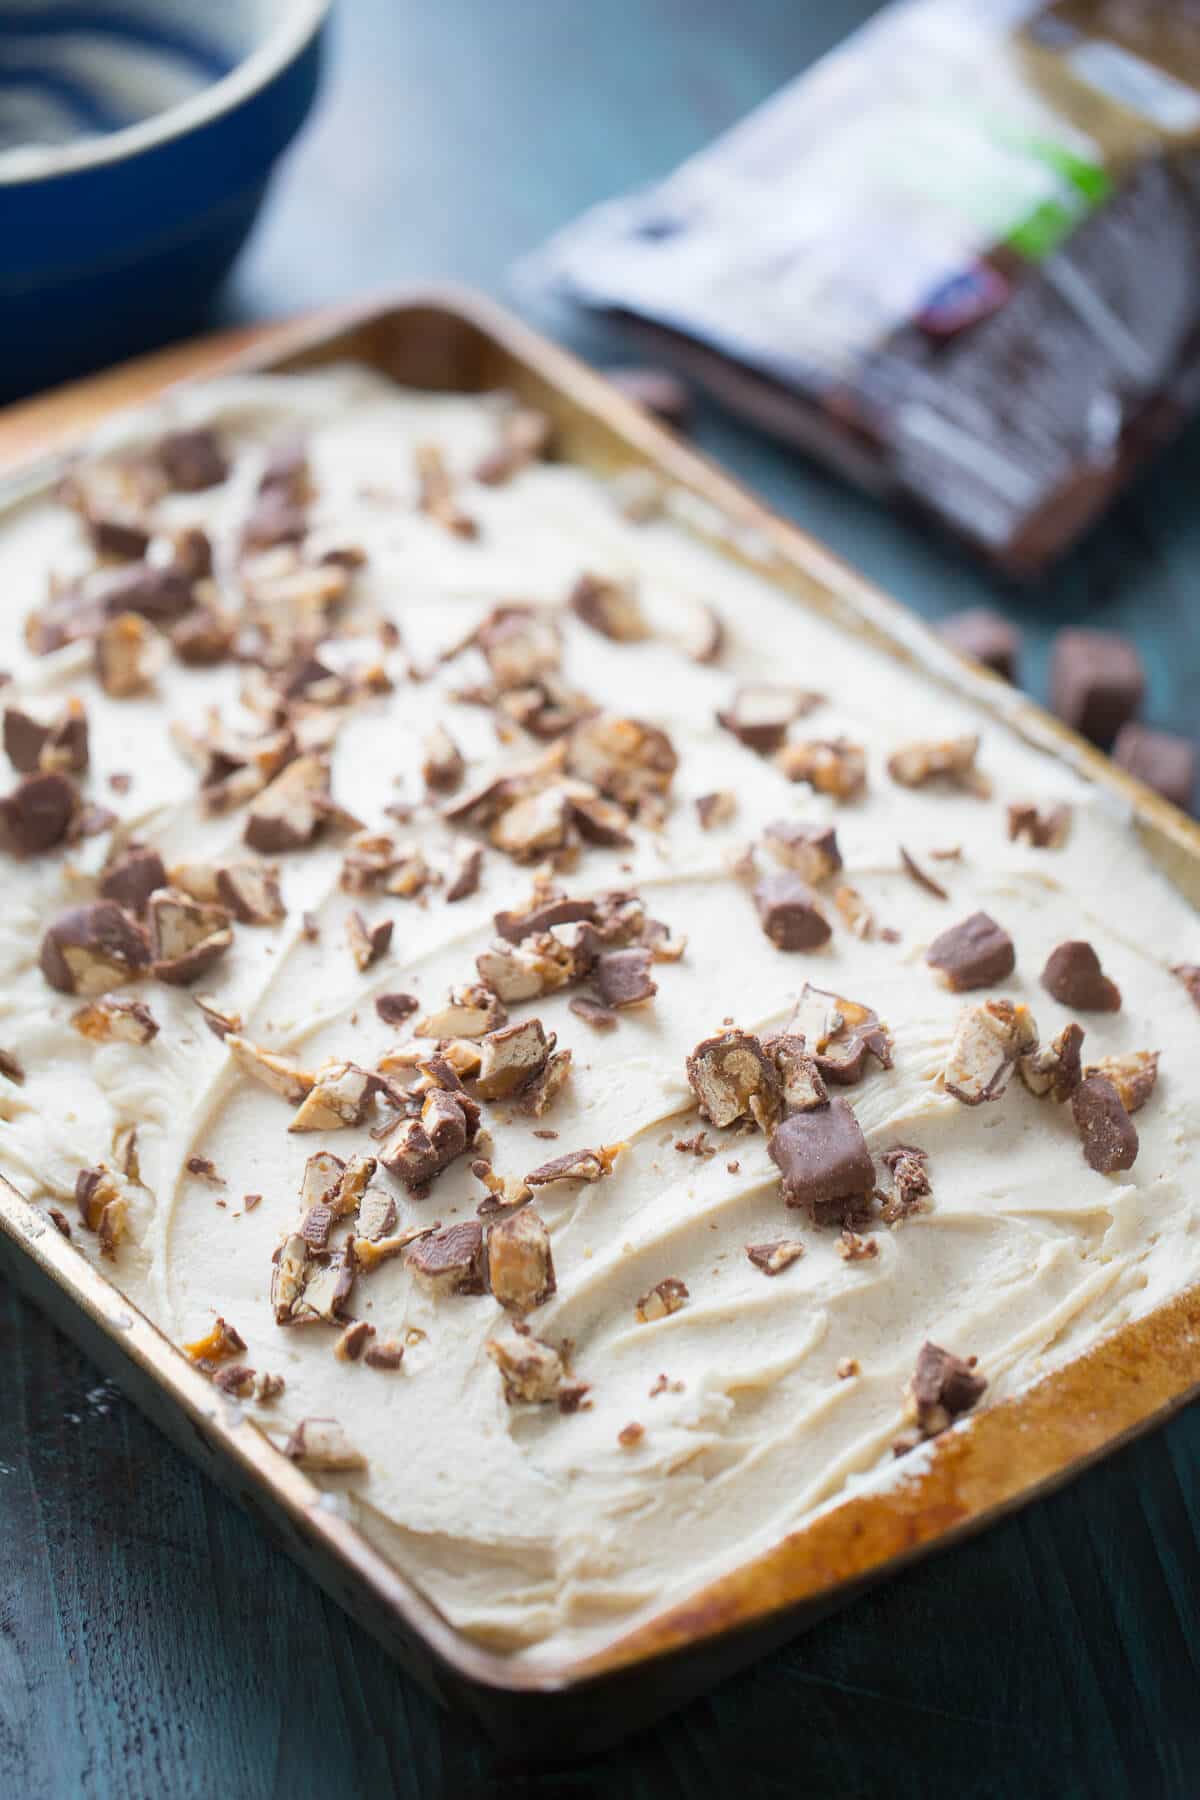 You need this Snickers Poke Cake! It is just what ever chocolate lover needs!